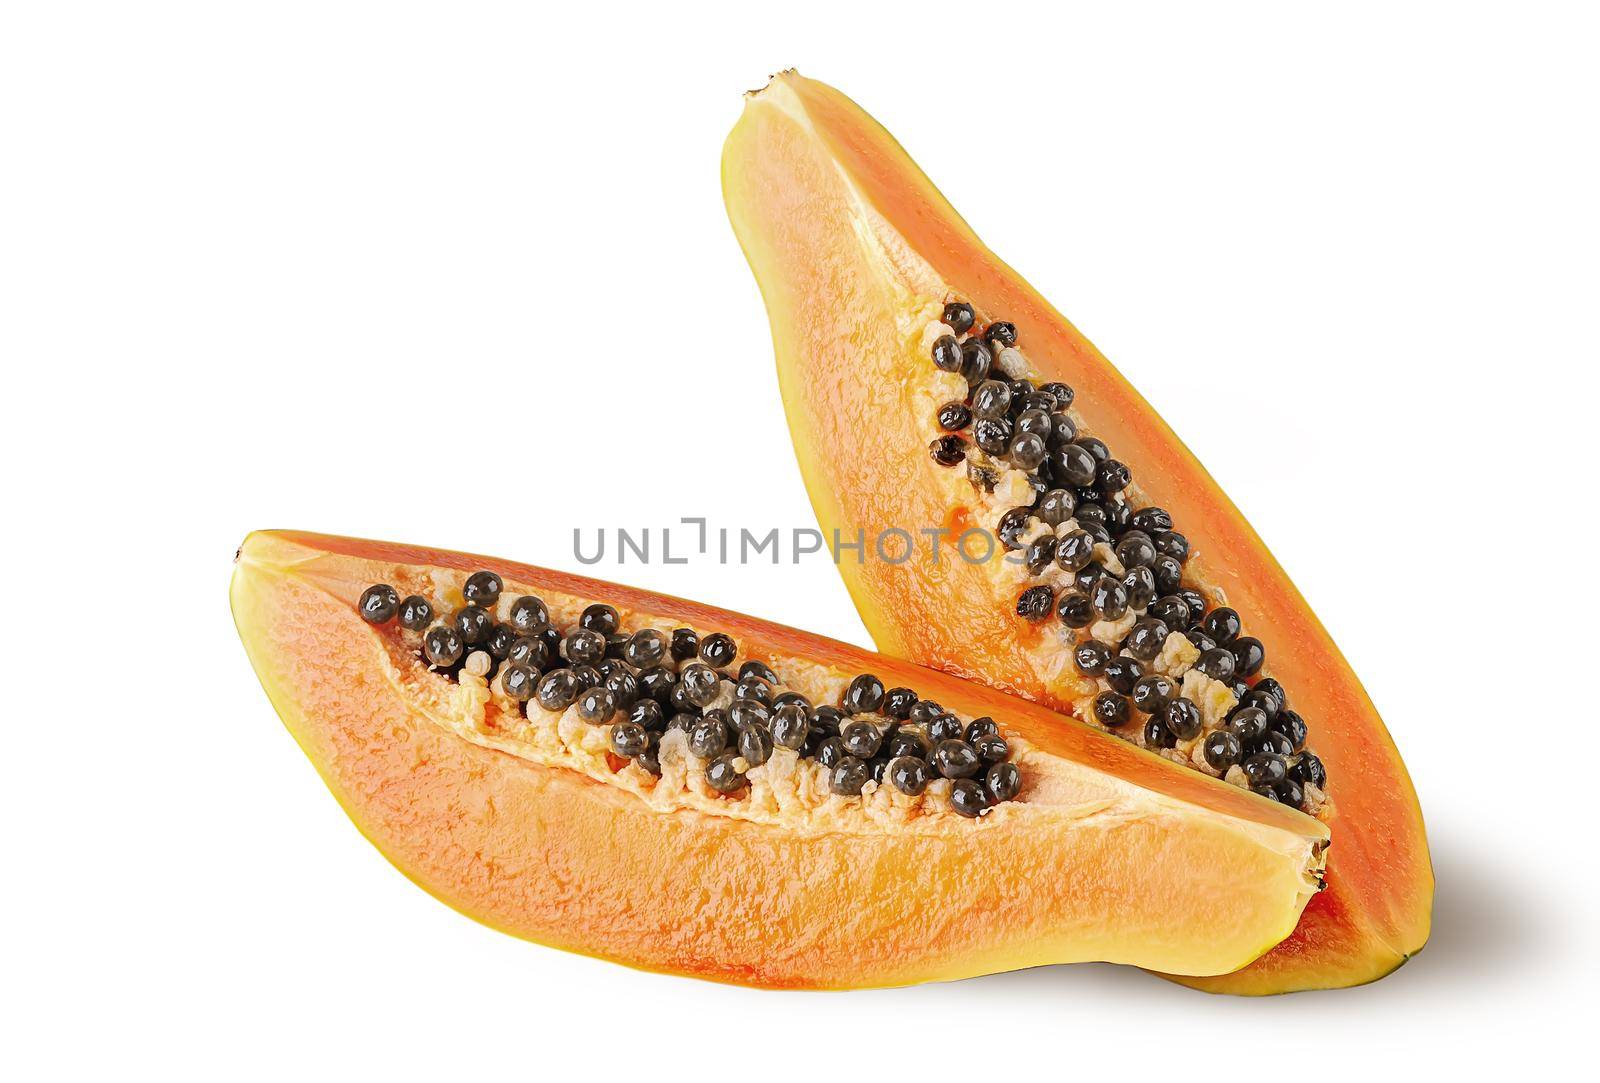 Two quarters of ripe papaya one after another isolated on white background